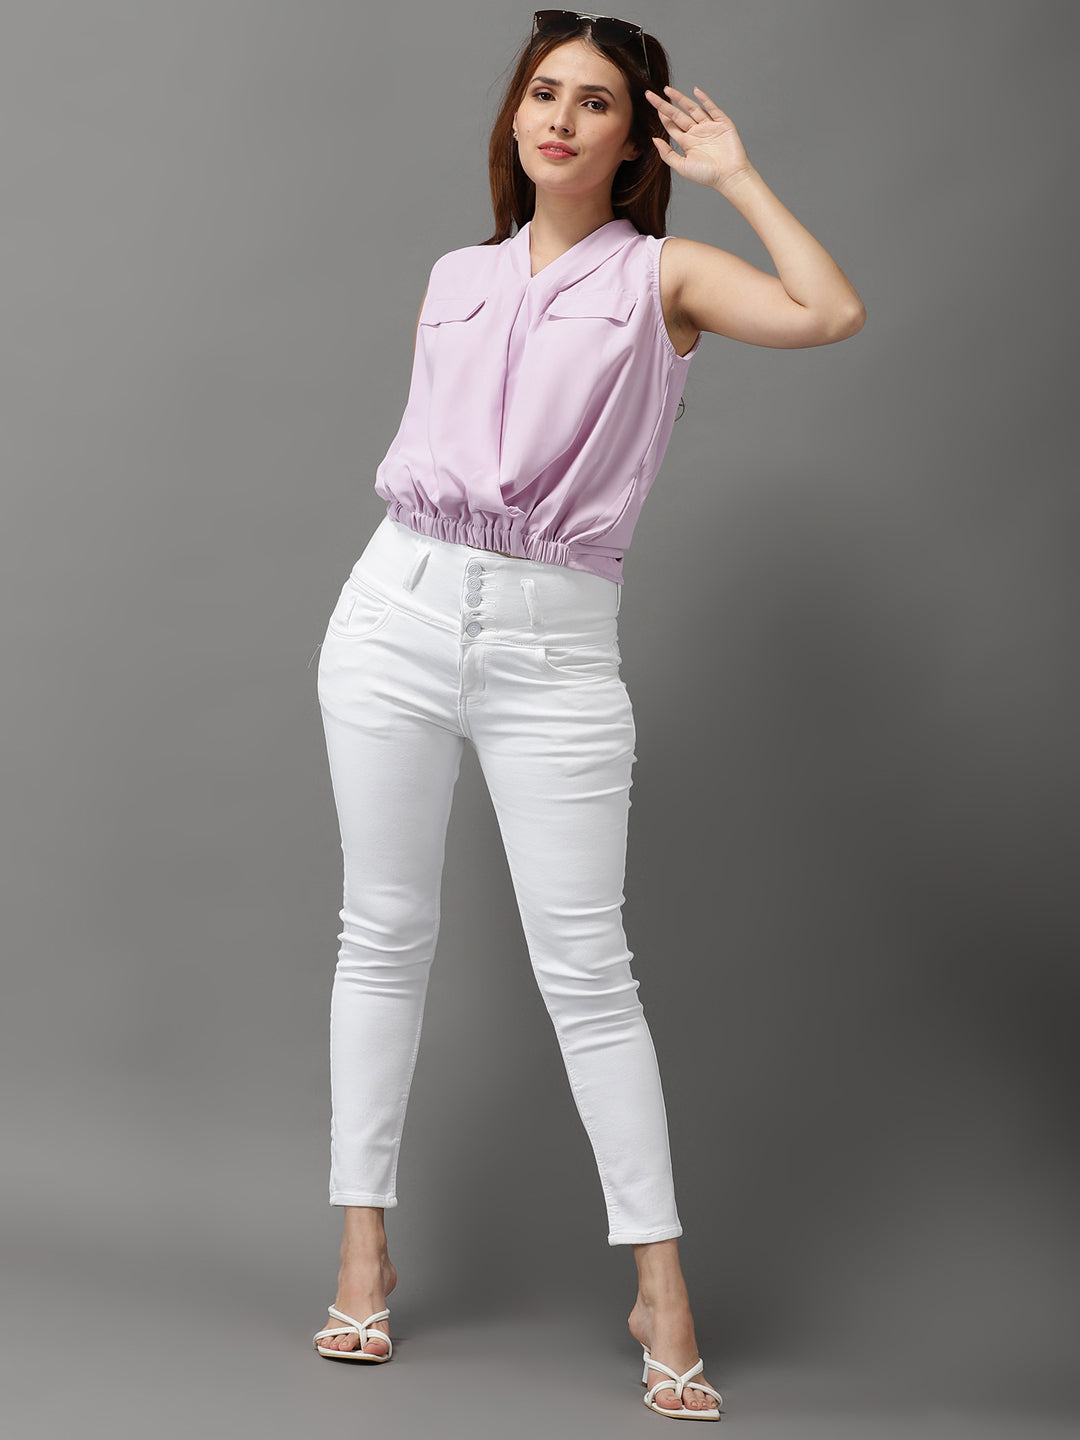 Women's Lavender Solid High-Low Top